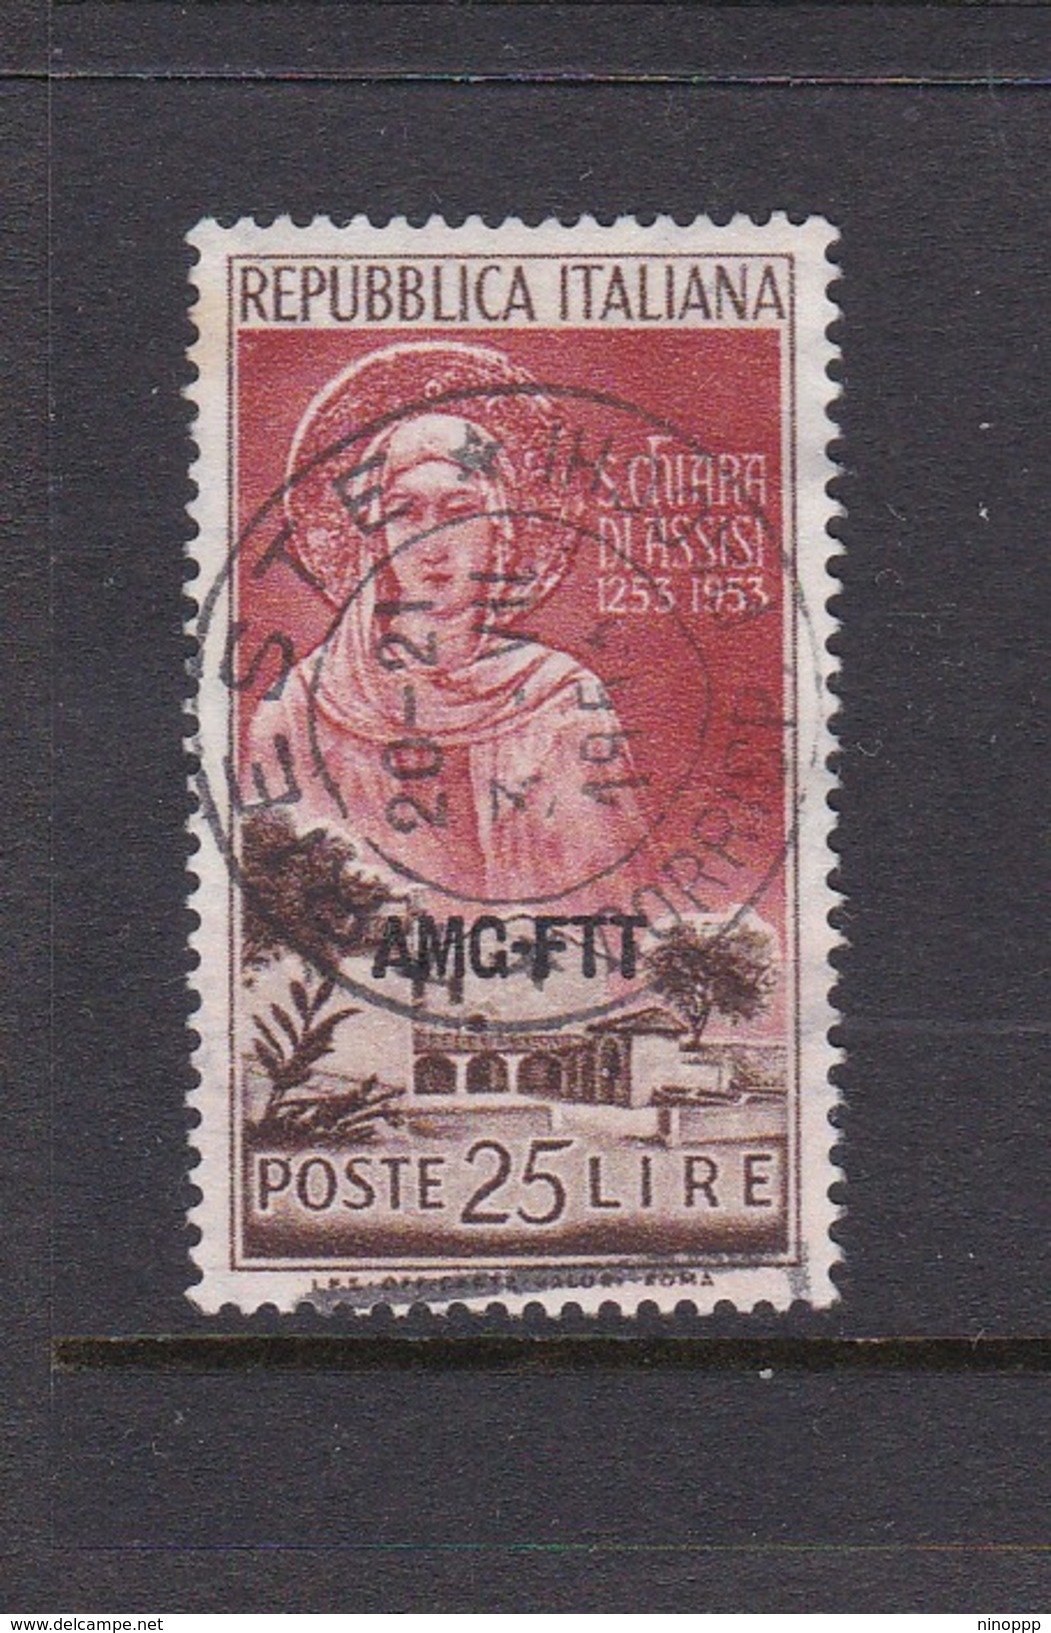 Trieste Allied Military Government S 177 1953 7th Death Centenary Of St Claire, Used - Afgestempeld